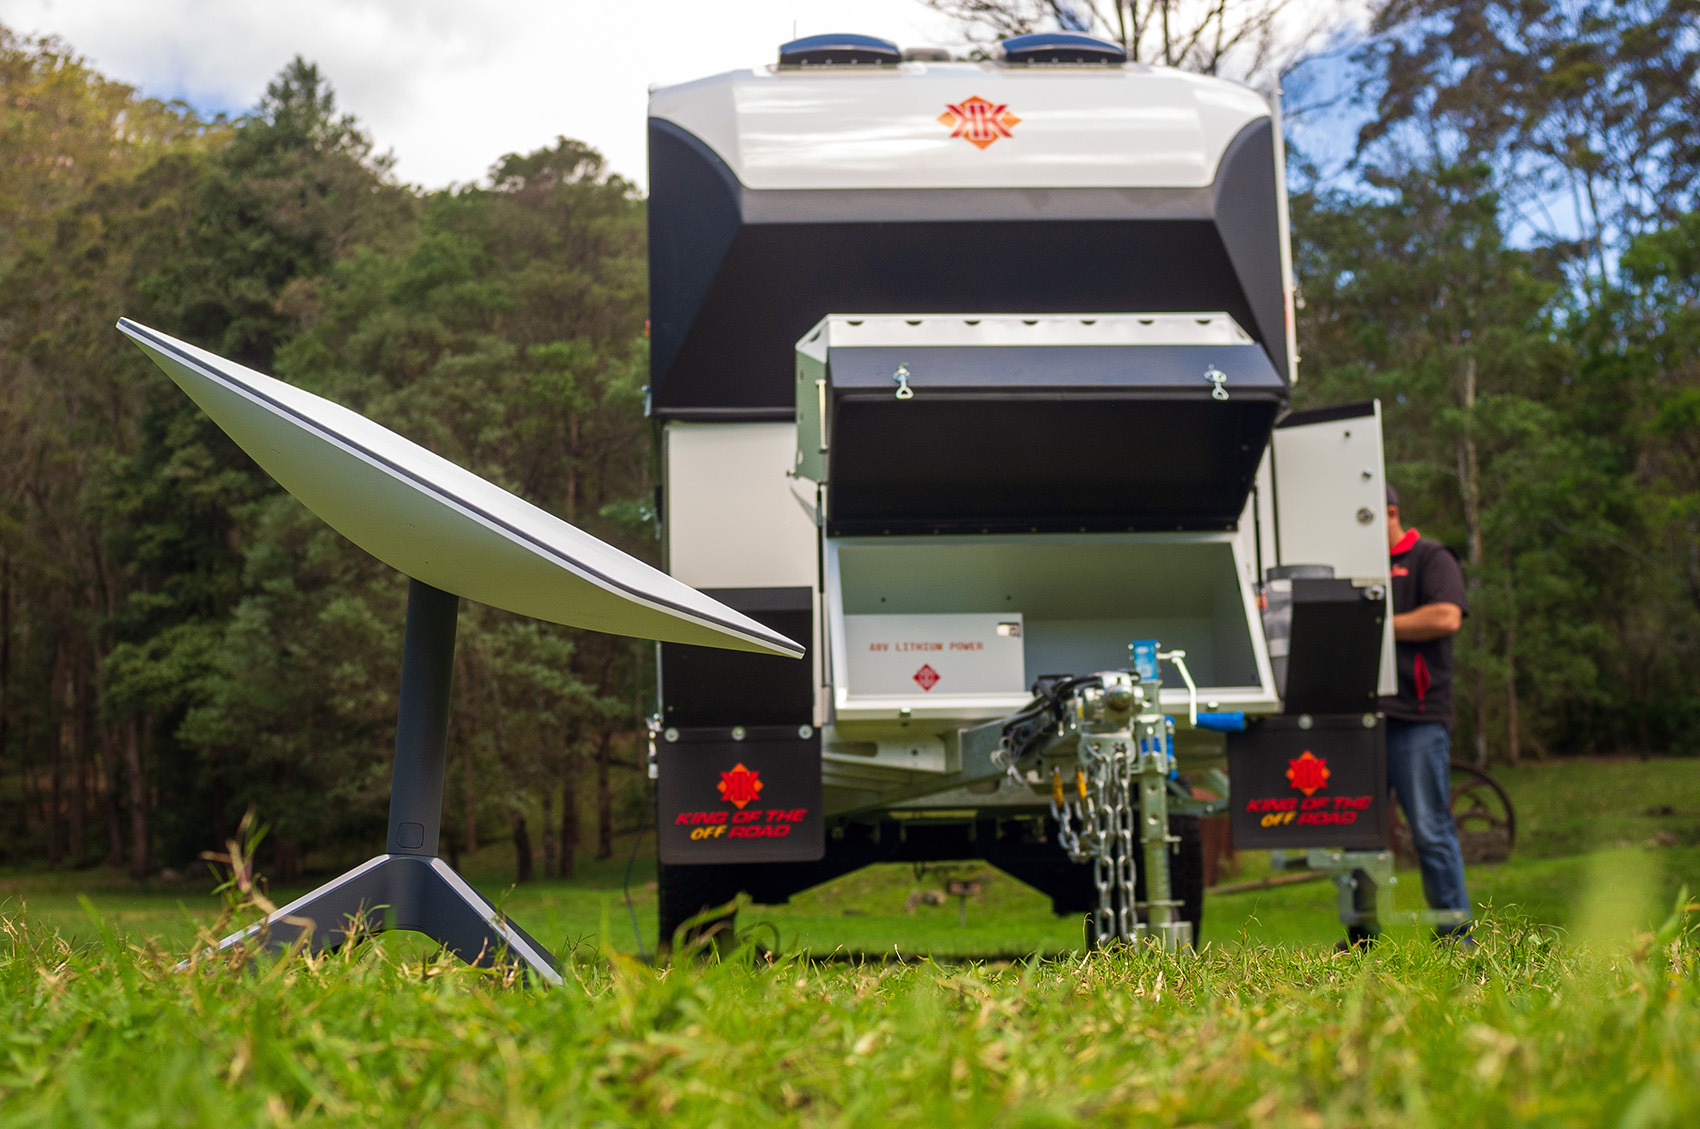 Offroad caravan with Starlink satellite internet dish in front